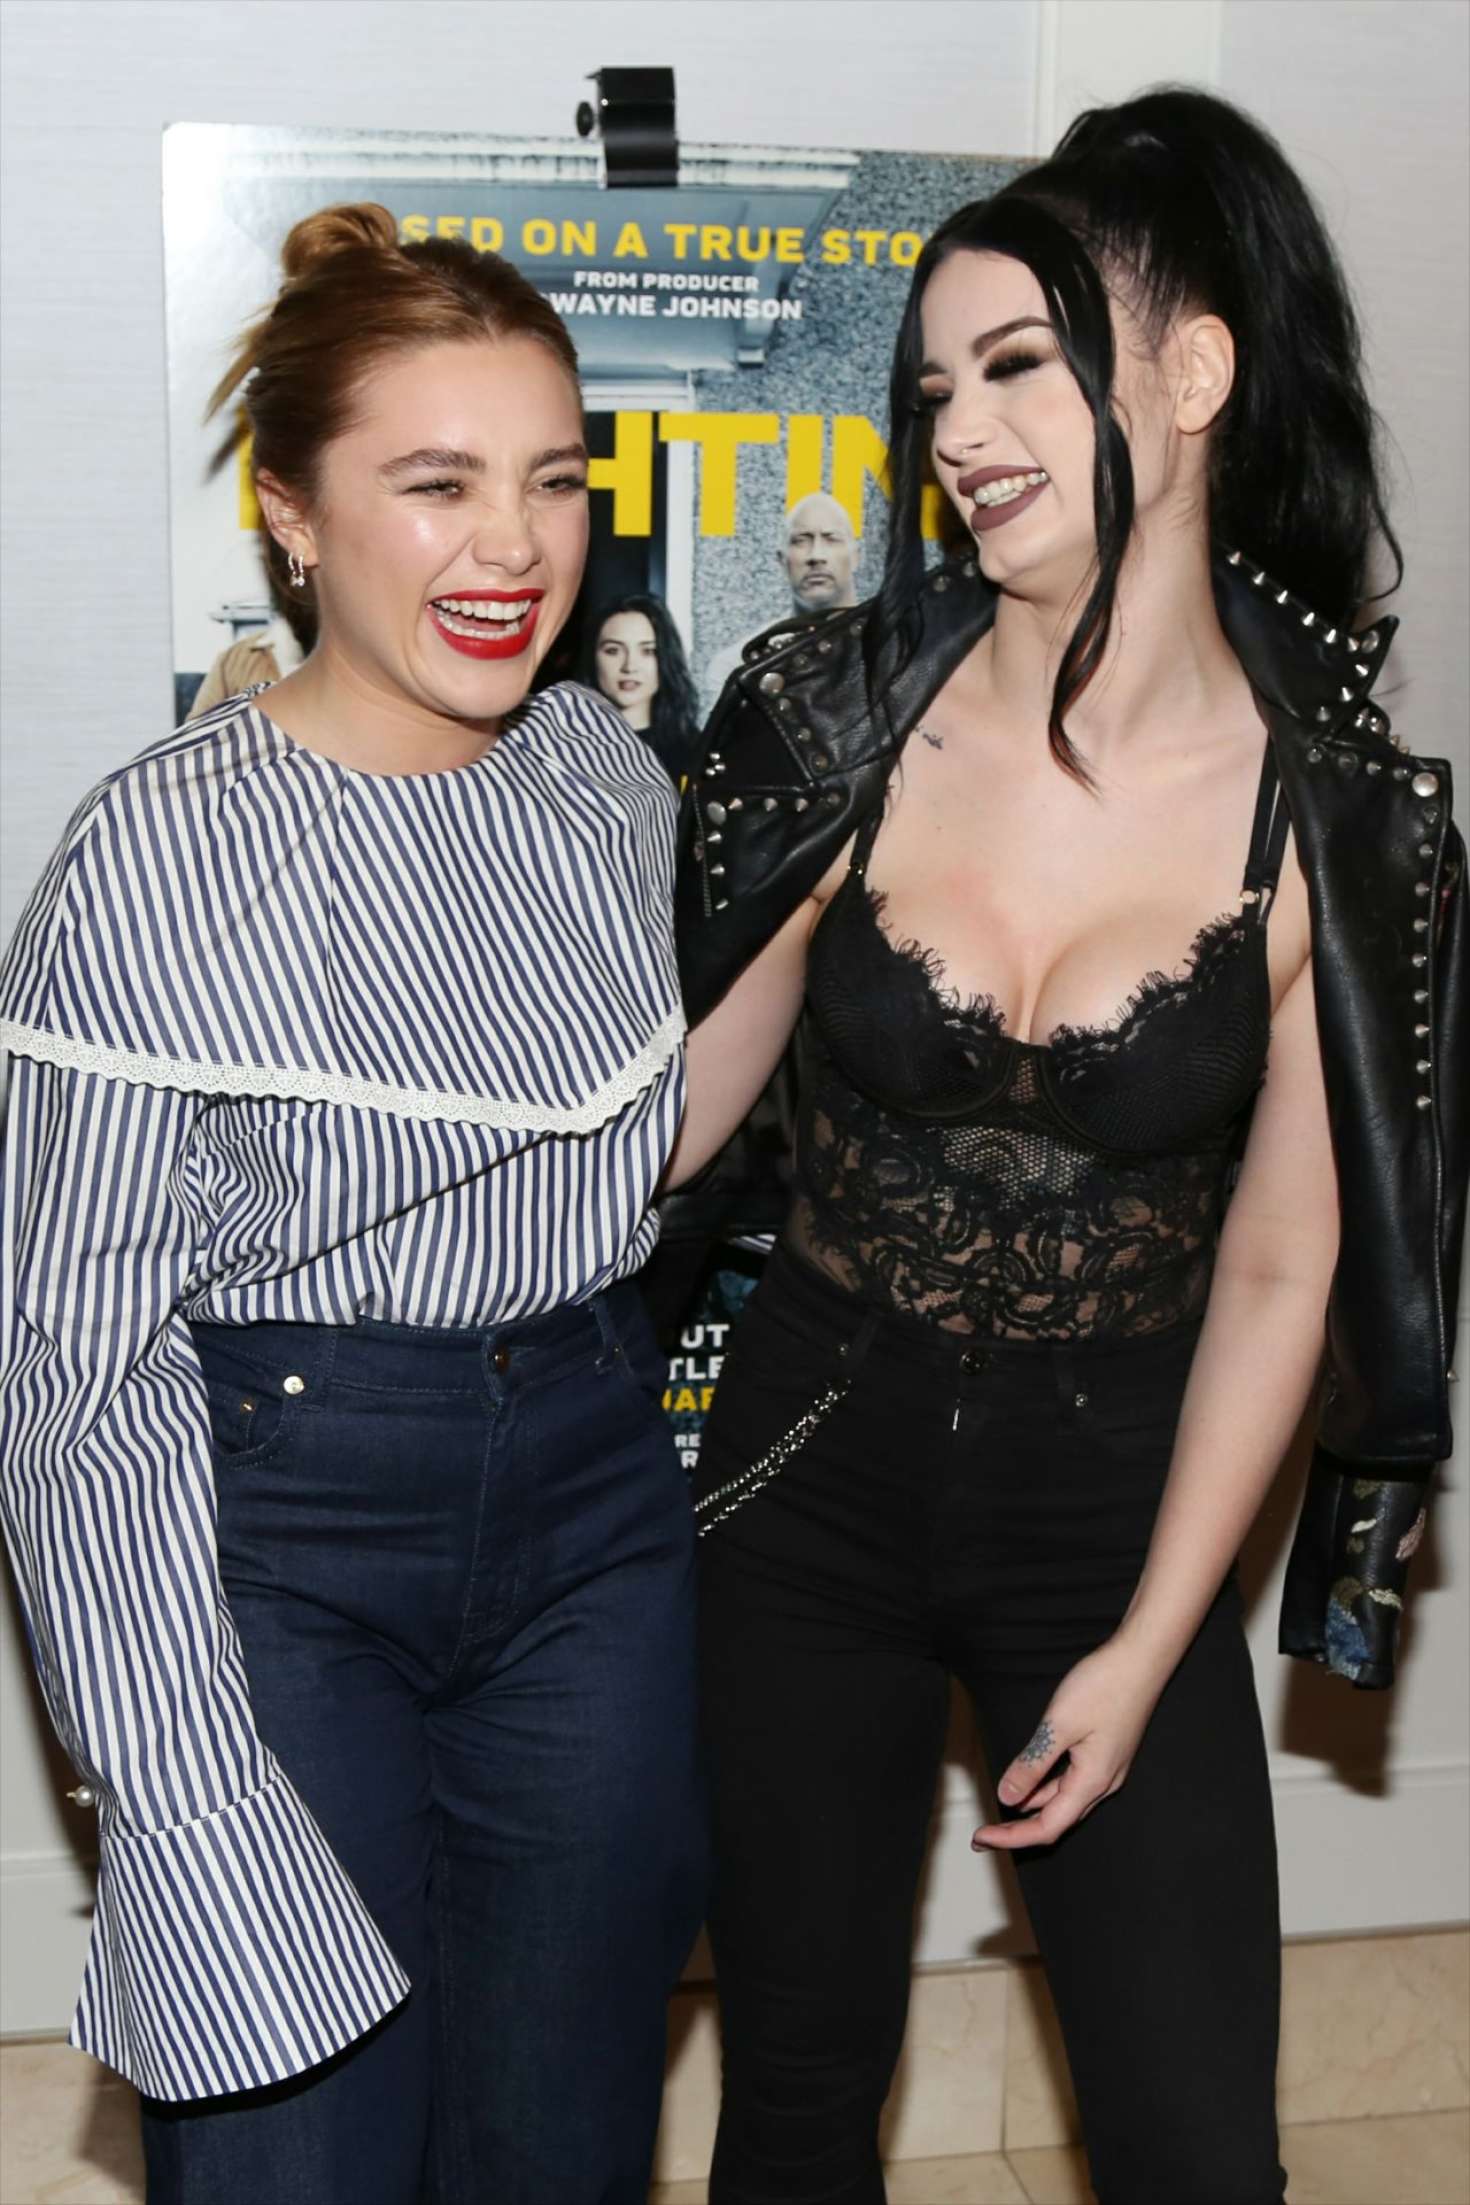 Florence Pugh and Saraya Bevis - 'Fighting With My Family' Screening in Los Angeles